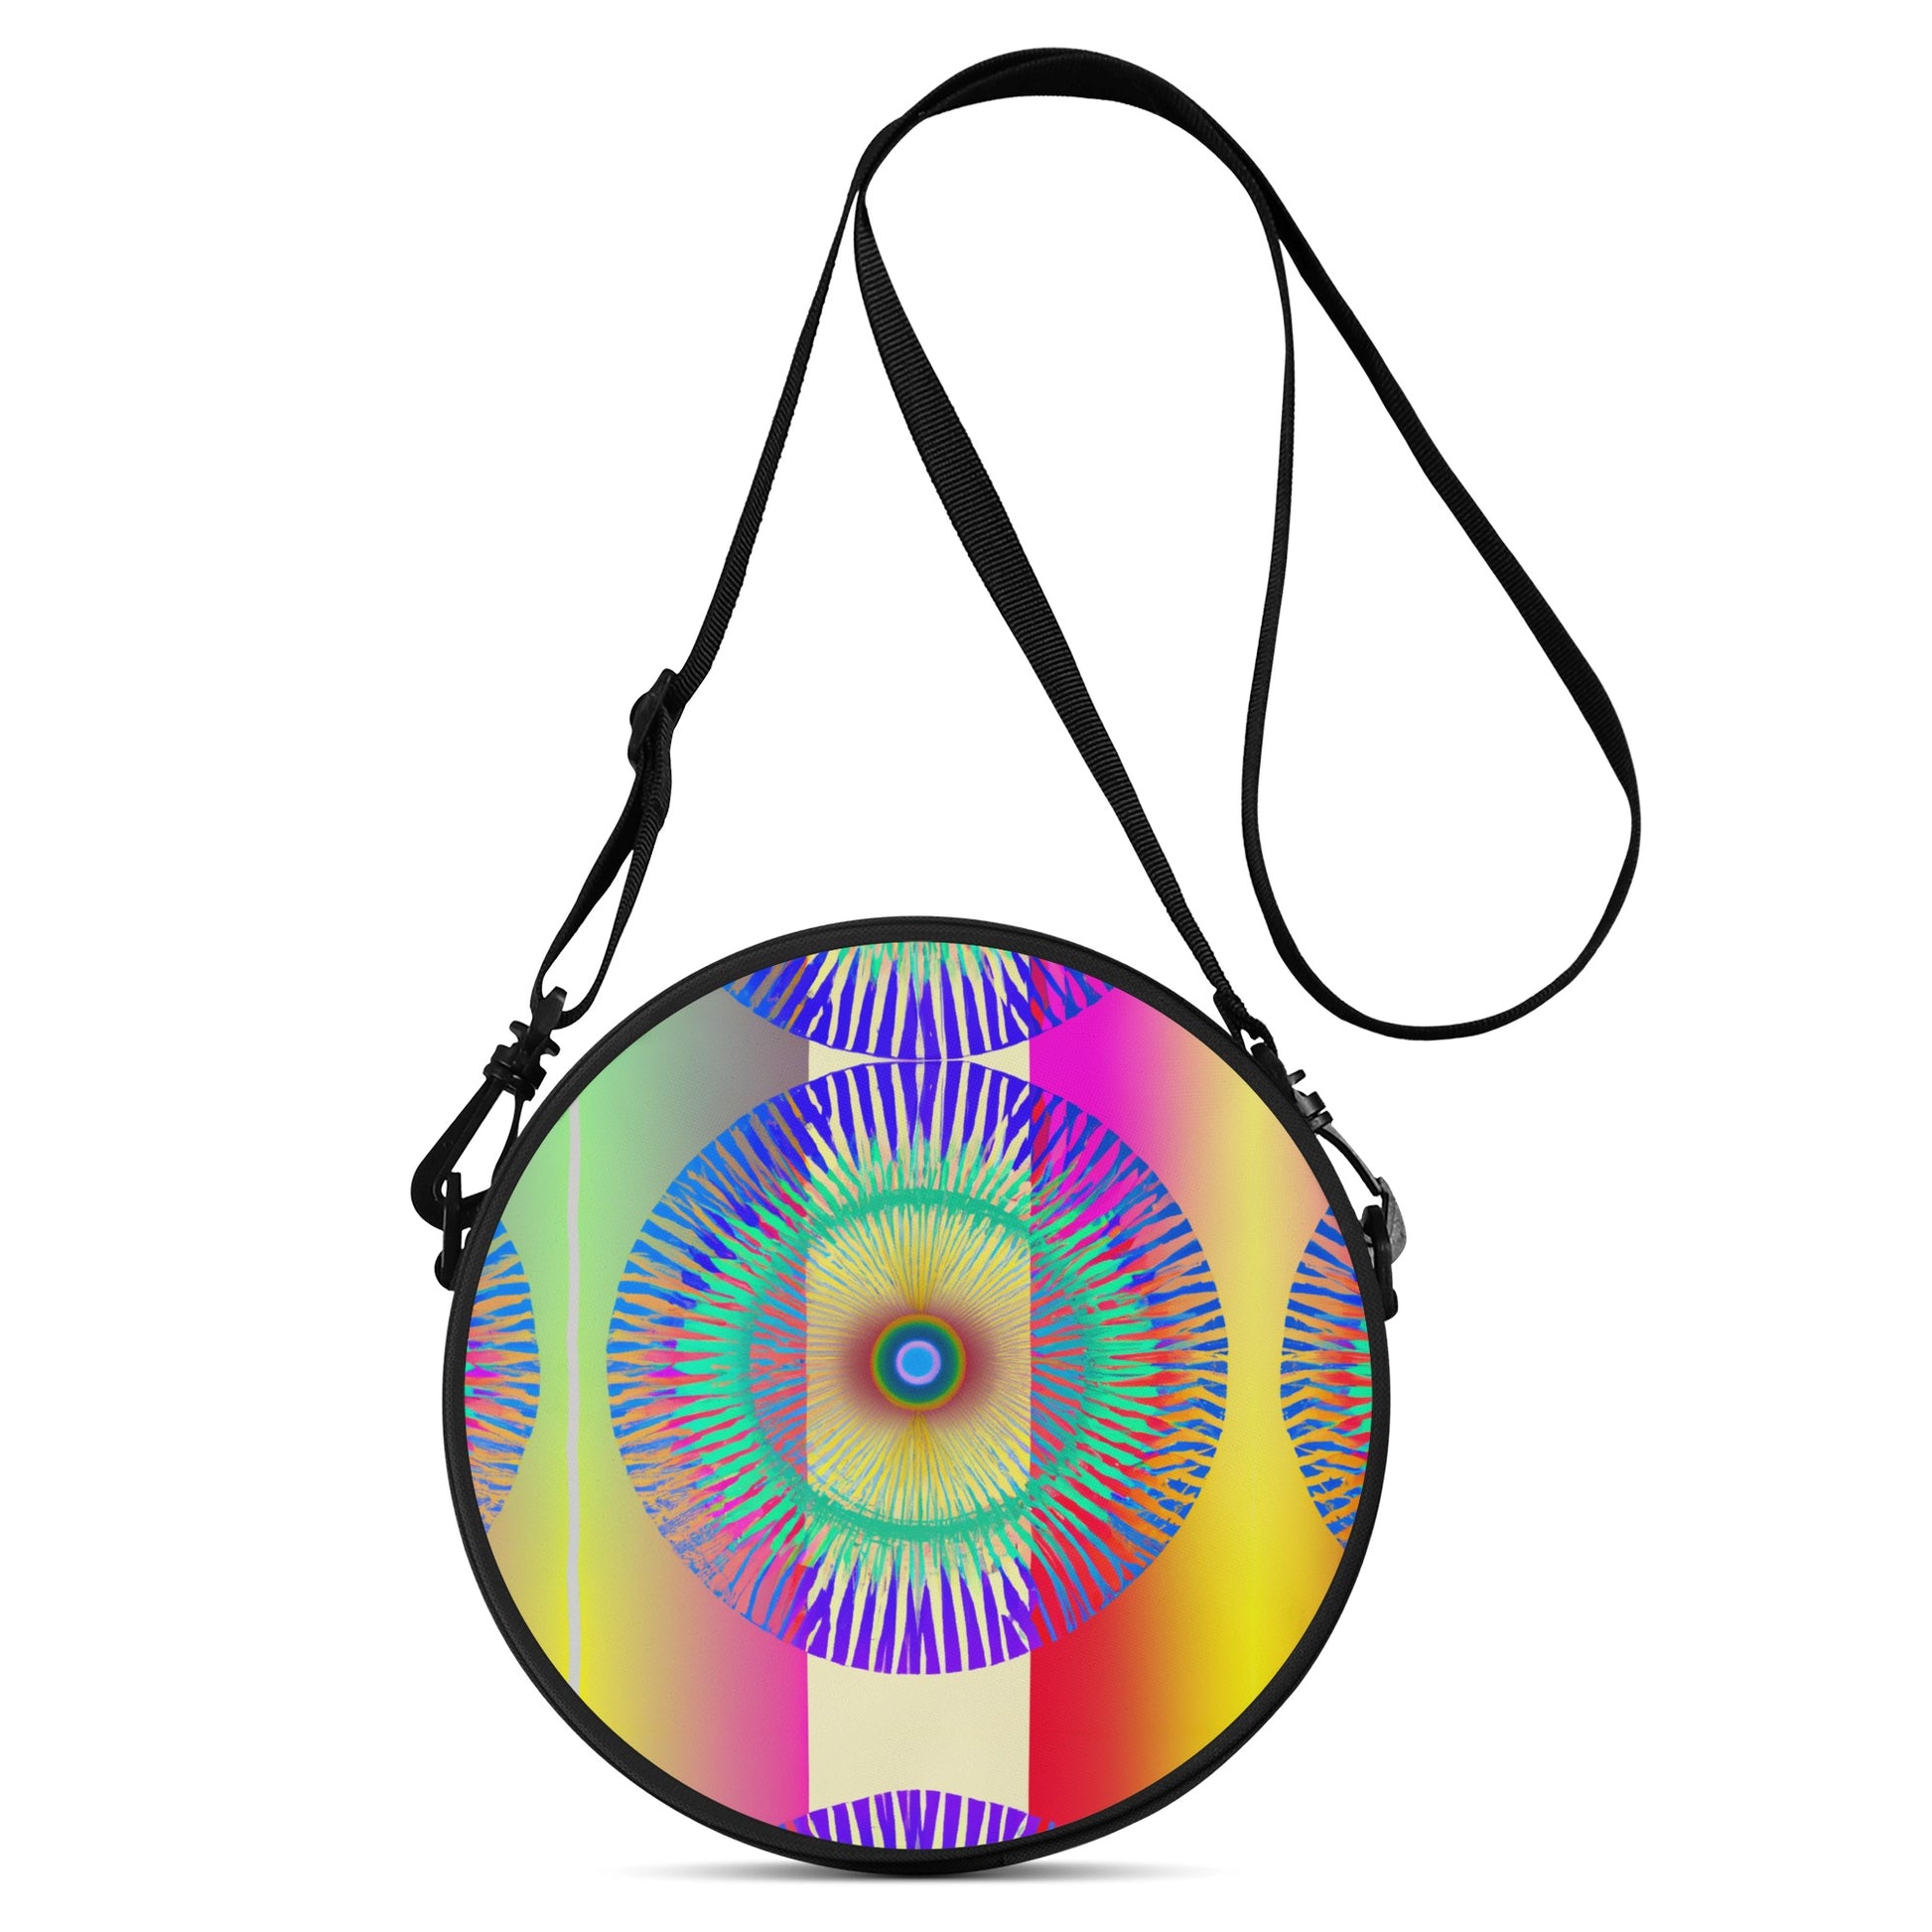 This Round Satchel Bag is a stylish accessory with a cool design that is digitally printed on the front.  Featuring a unique and multi coloured vibrant design of a psychedelia styled iris pattern.  Perfect for any look, its eye-catching design will ensure you stand out from the crowd! 